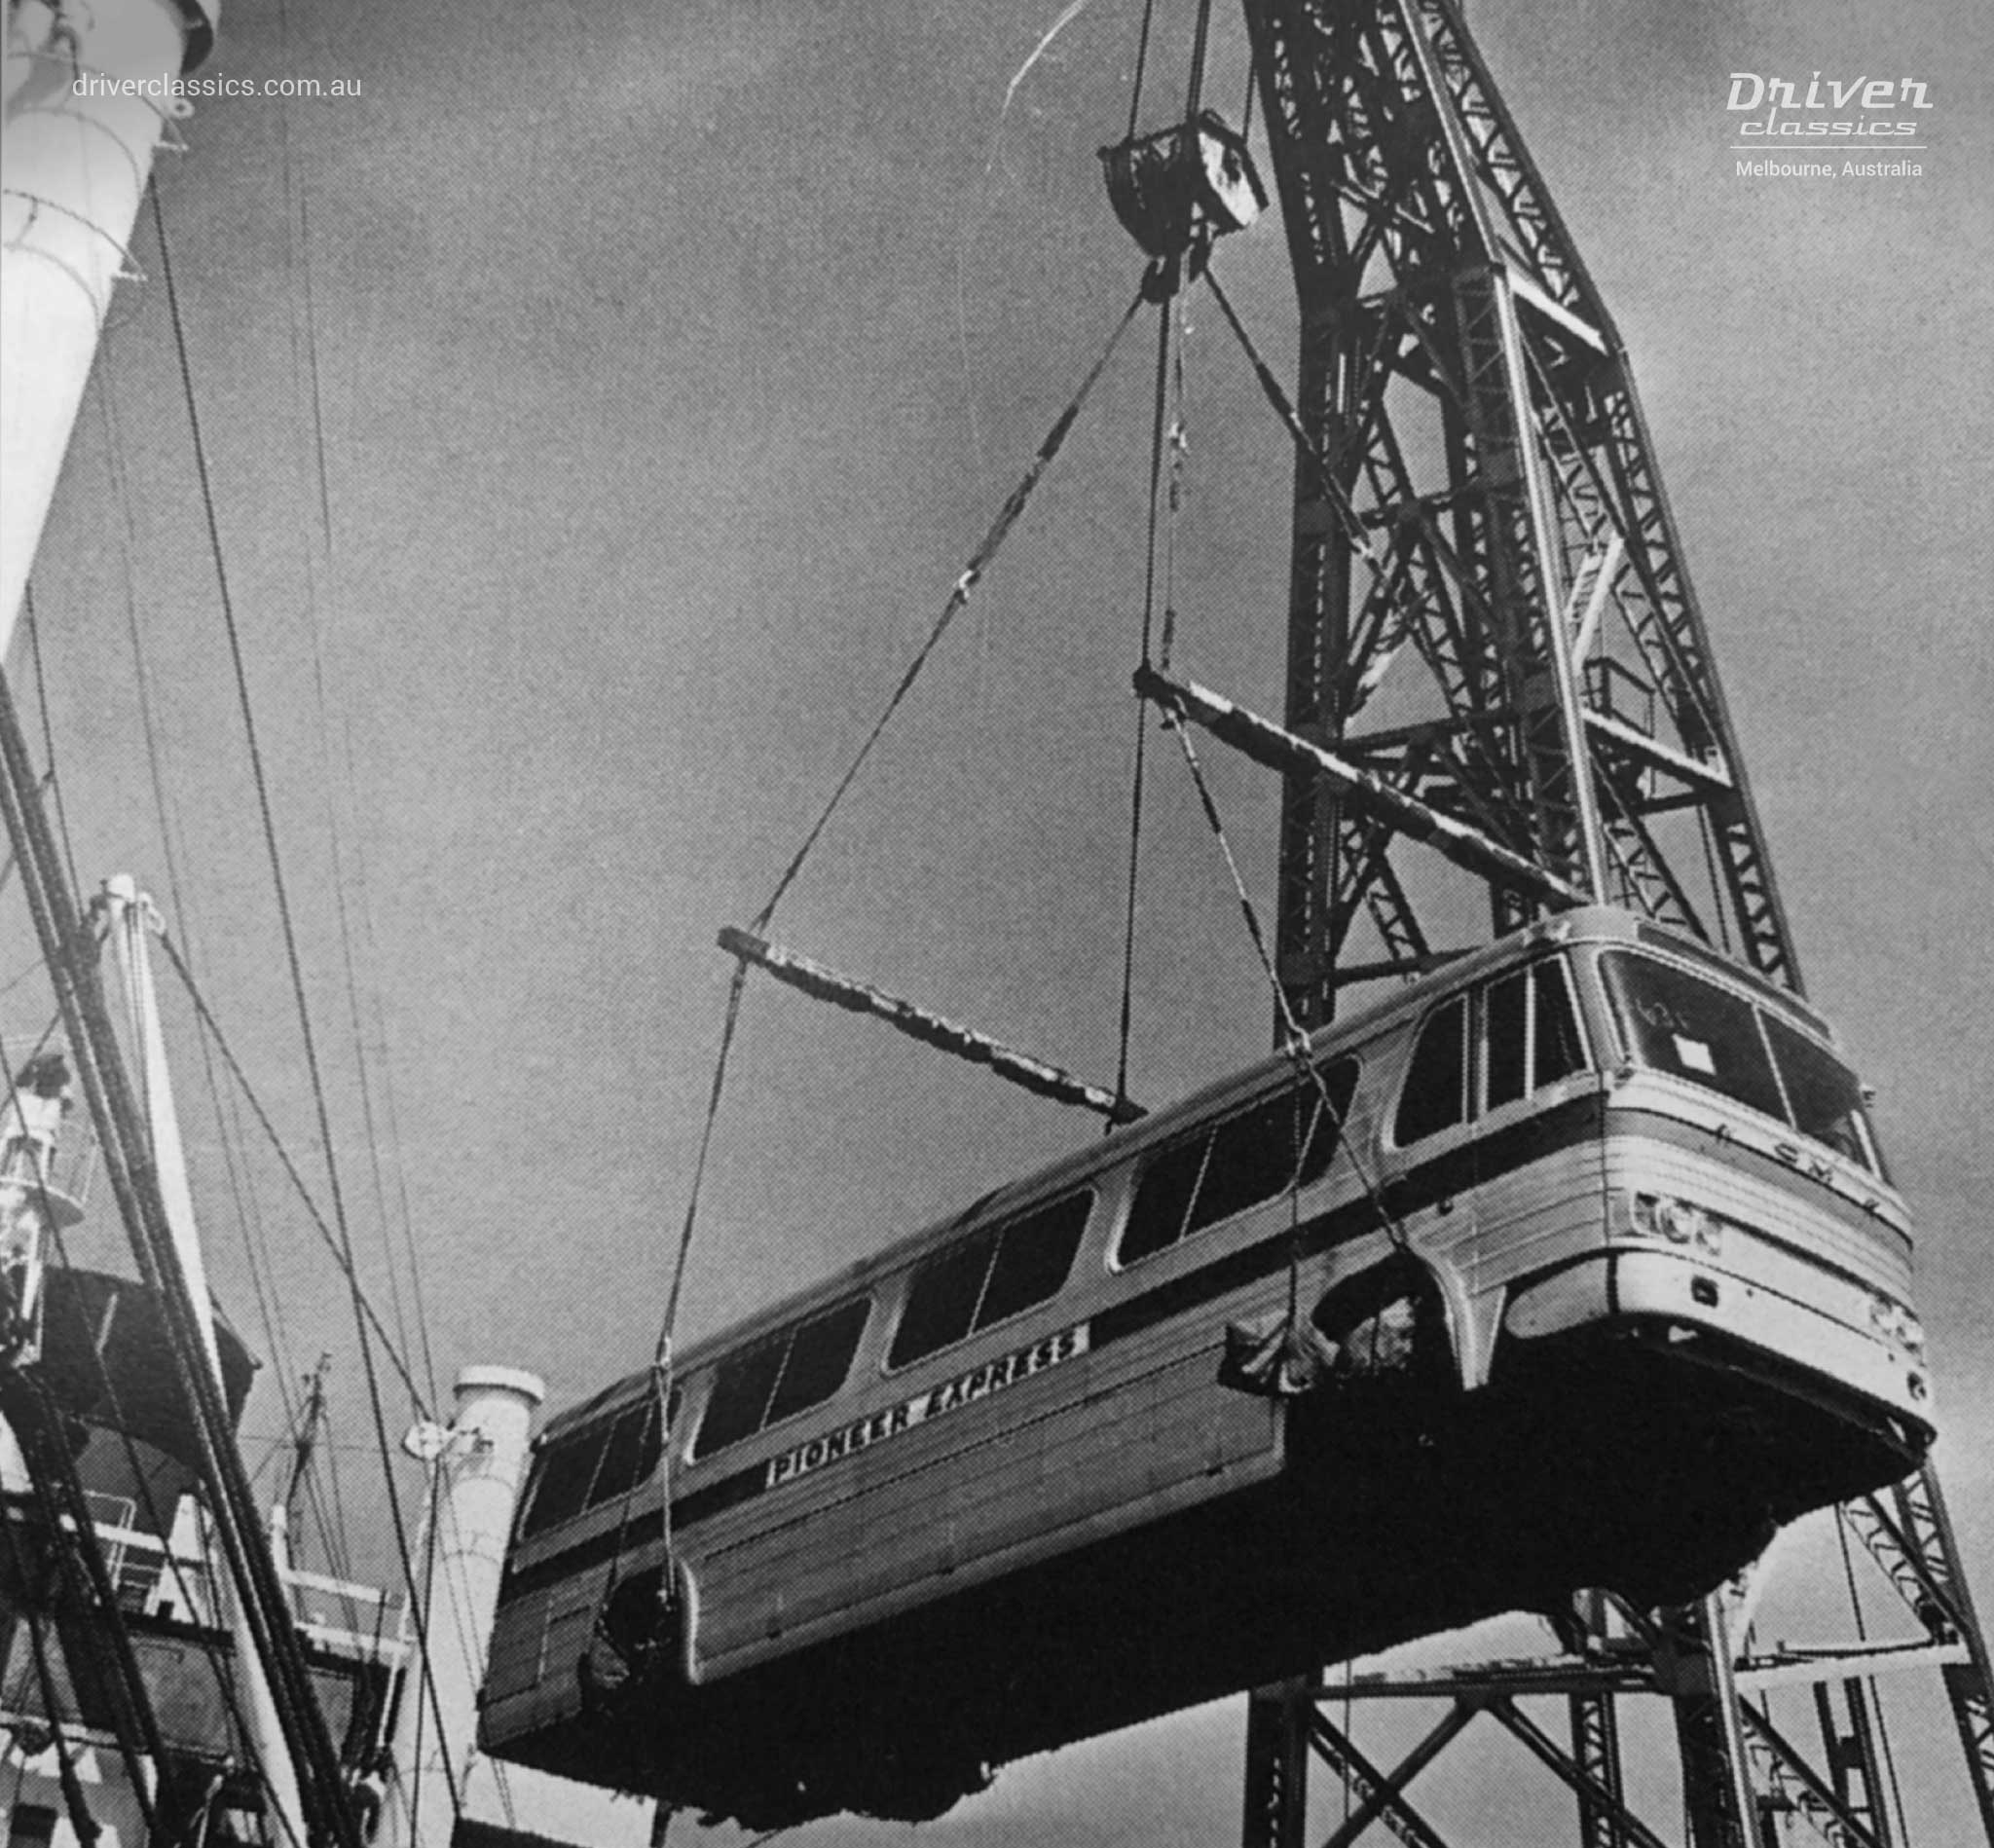 GM PD-4106 bus, early 1960s version, being unloaded at Melbourne Docks